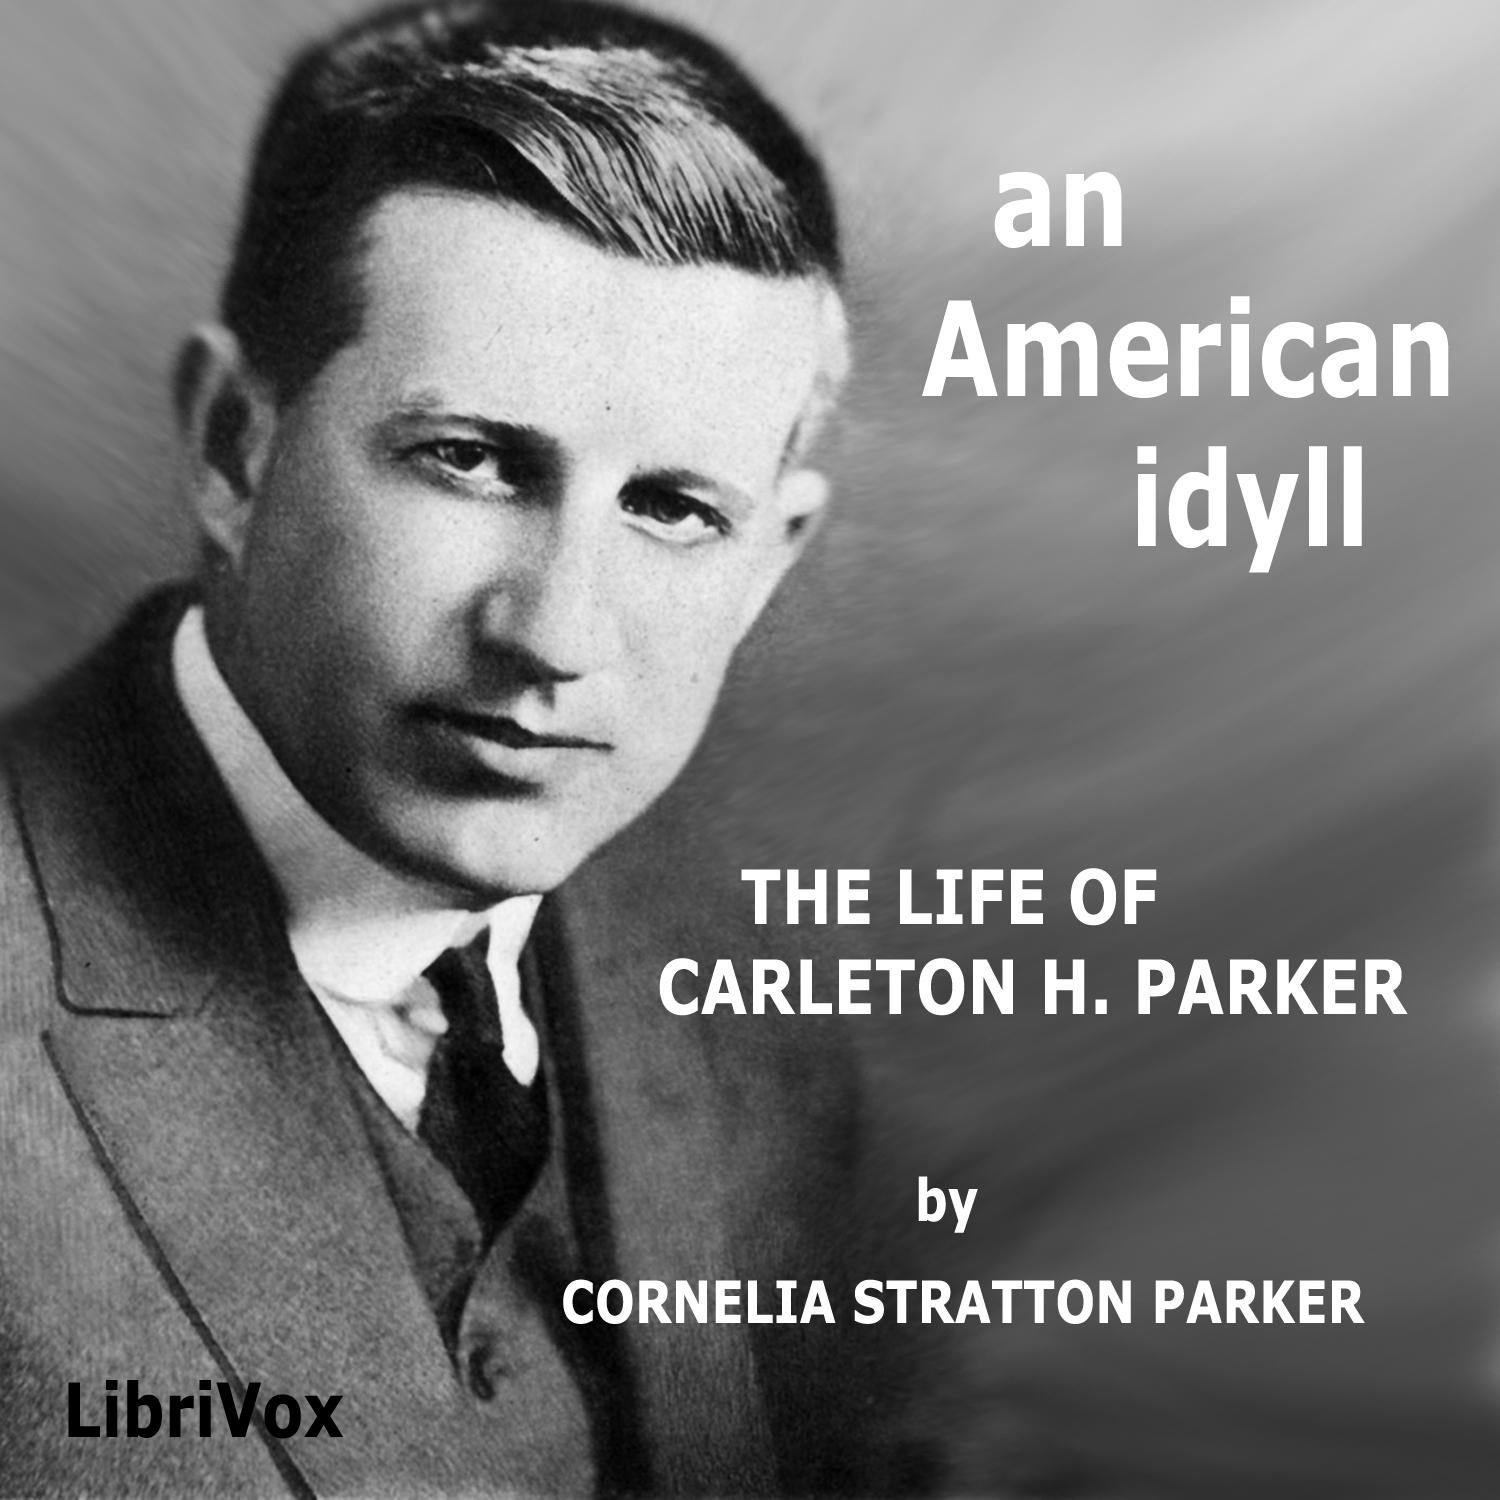 An American Idyll: The Life of Carlton H. Parker, #9 - Chapter VIII